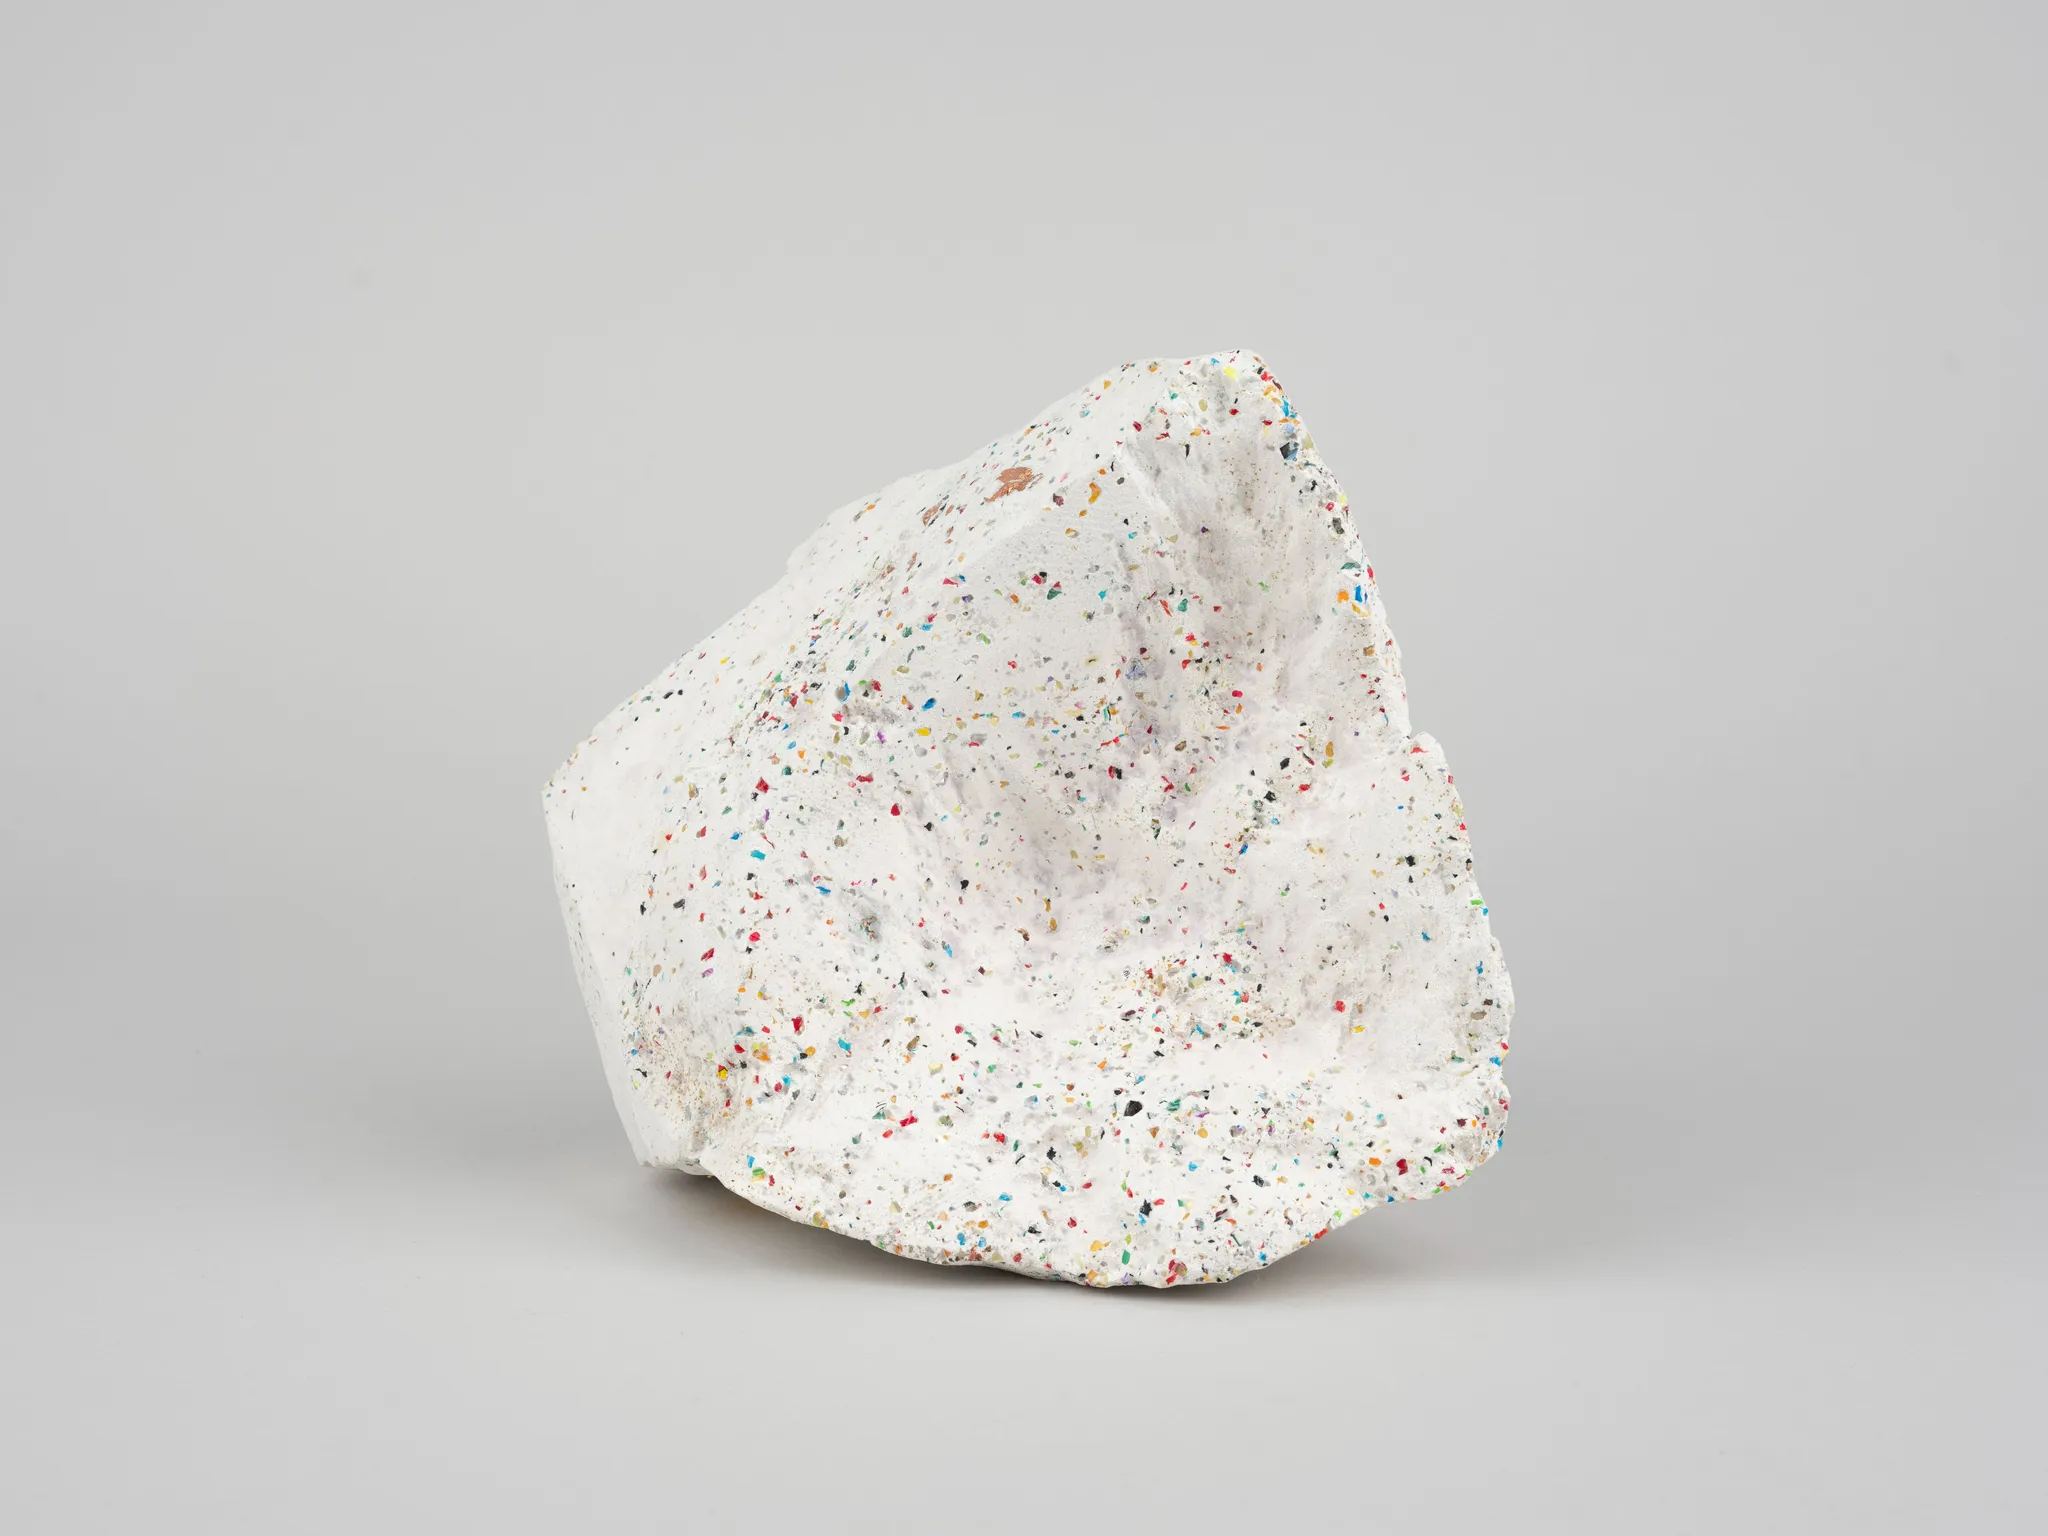 A white porous stone with colorful dots, photographed against a white background